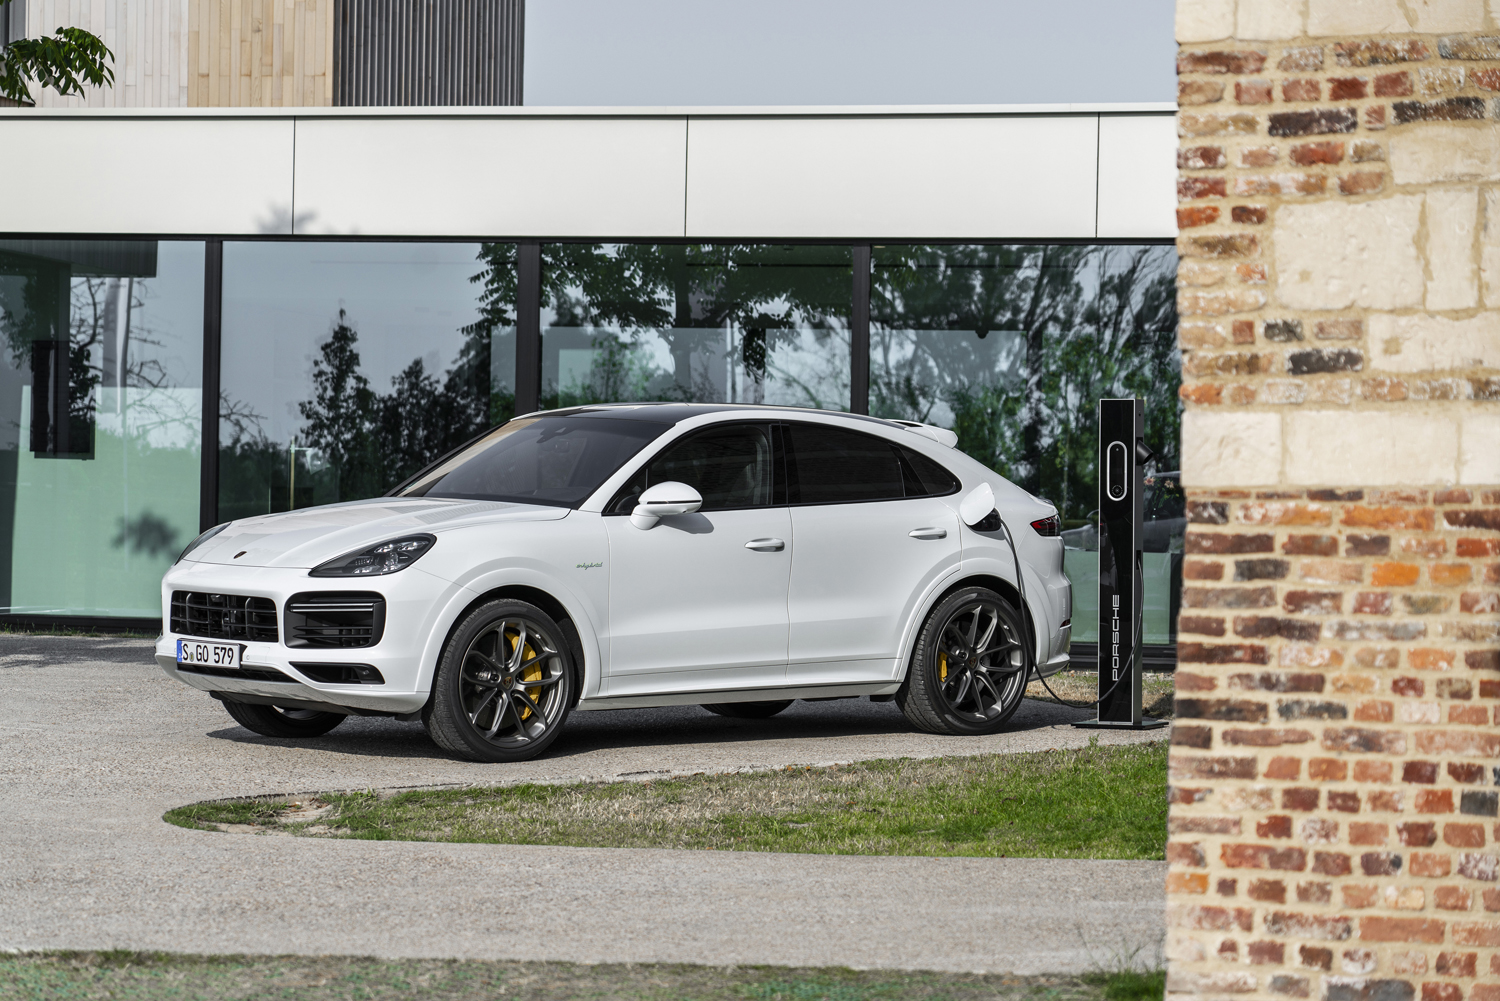 2020 porsche cayenne turbo s e hybrid delivers 670 hp electrified punch tseh 2